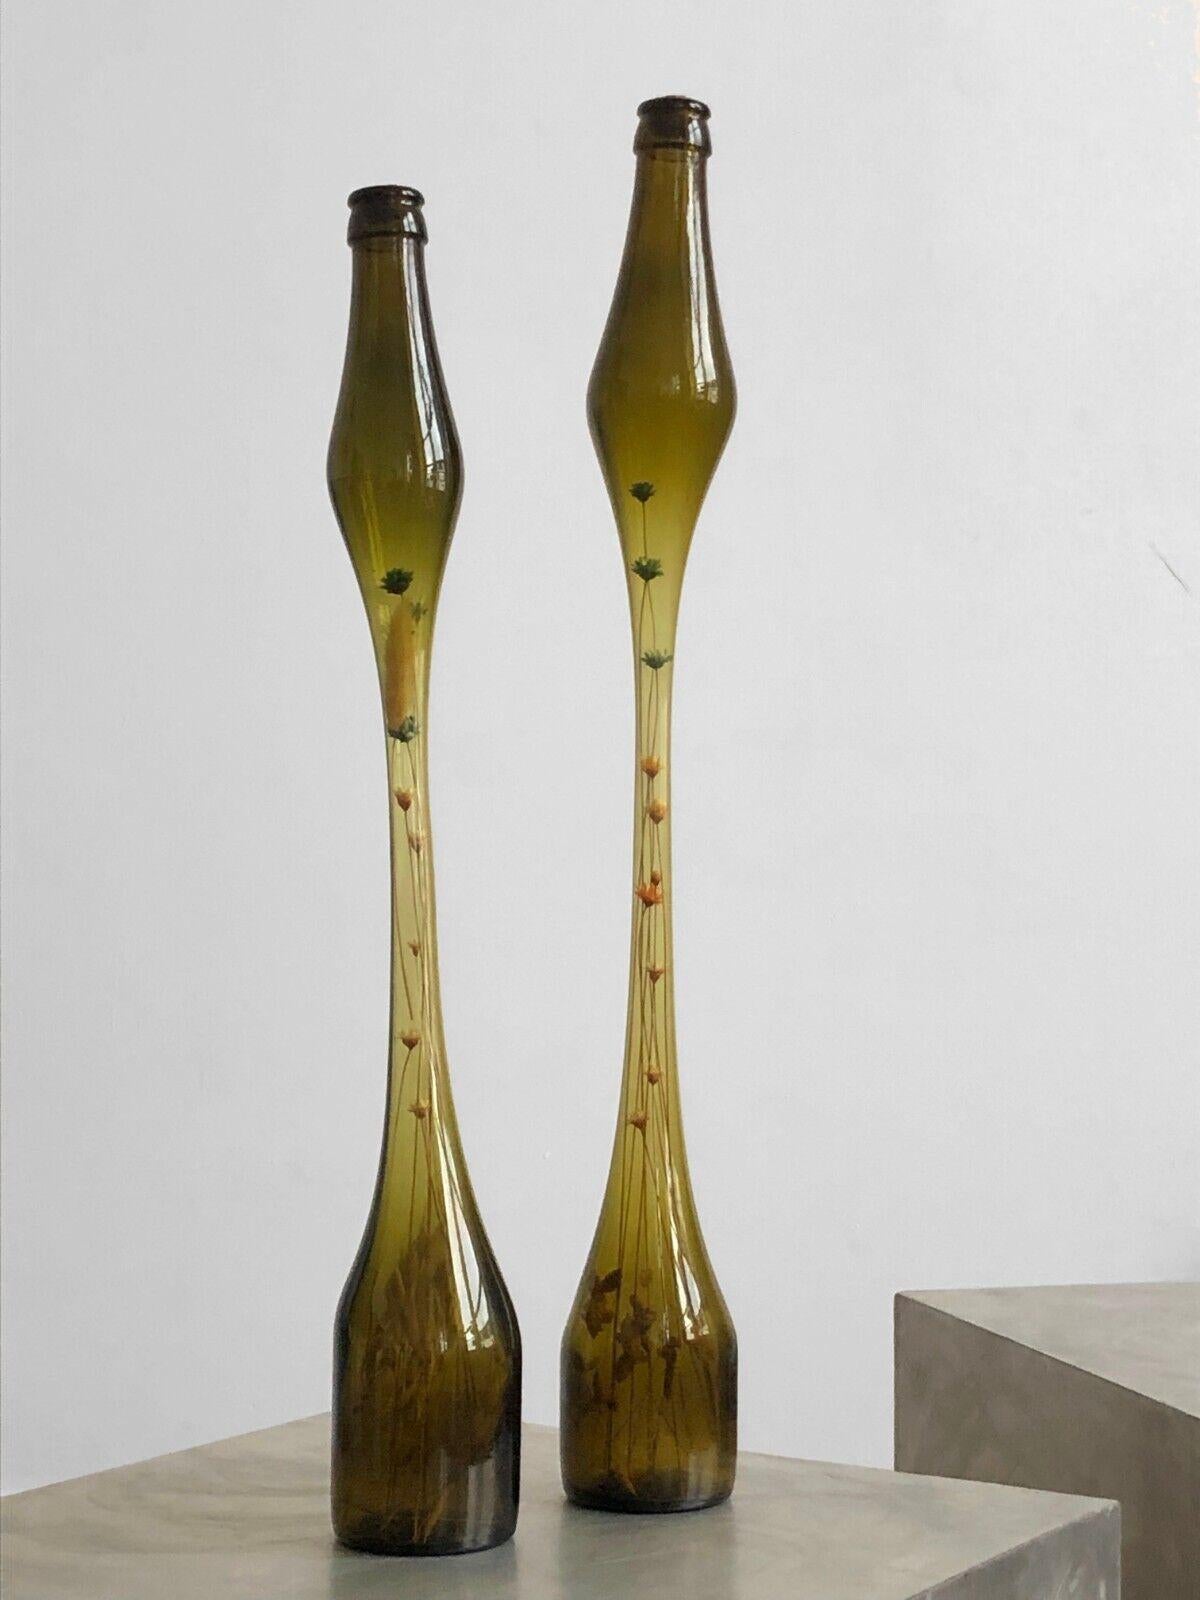 A pair of superb tapered bottle vases, Modernist, Forme-Libre, with stretched, sculpted, hot-melted bodies, in amber khaki blown glass, including fine compositions of herbs and dried flowers, artist's work, to be attributed, France 1960.